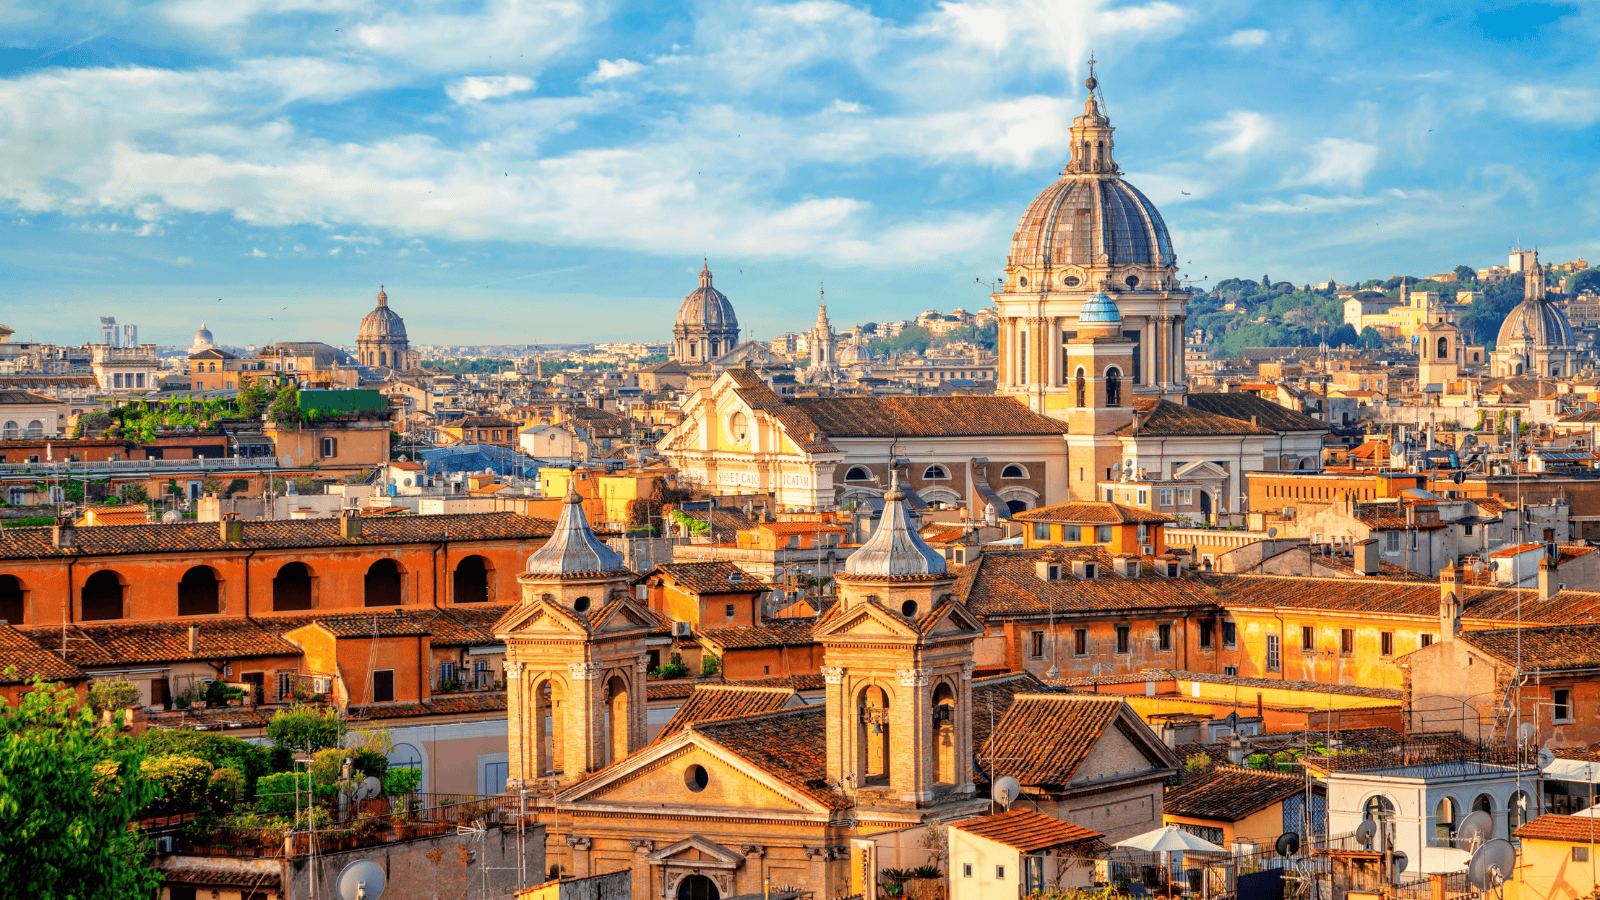 <p><a href="https://whatthefab.com/rome-sightseeing-the-ultimate-rome-travel-guide.html" rel="follow">Rome</a> is among Italy’s best places to spend an overnight layover. Top attractions like the Colosseum and Roman Forum are easy to visit in one afternoon or evening. It’s a gratifying, quick trip en route to your final destination.</p>